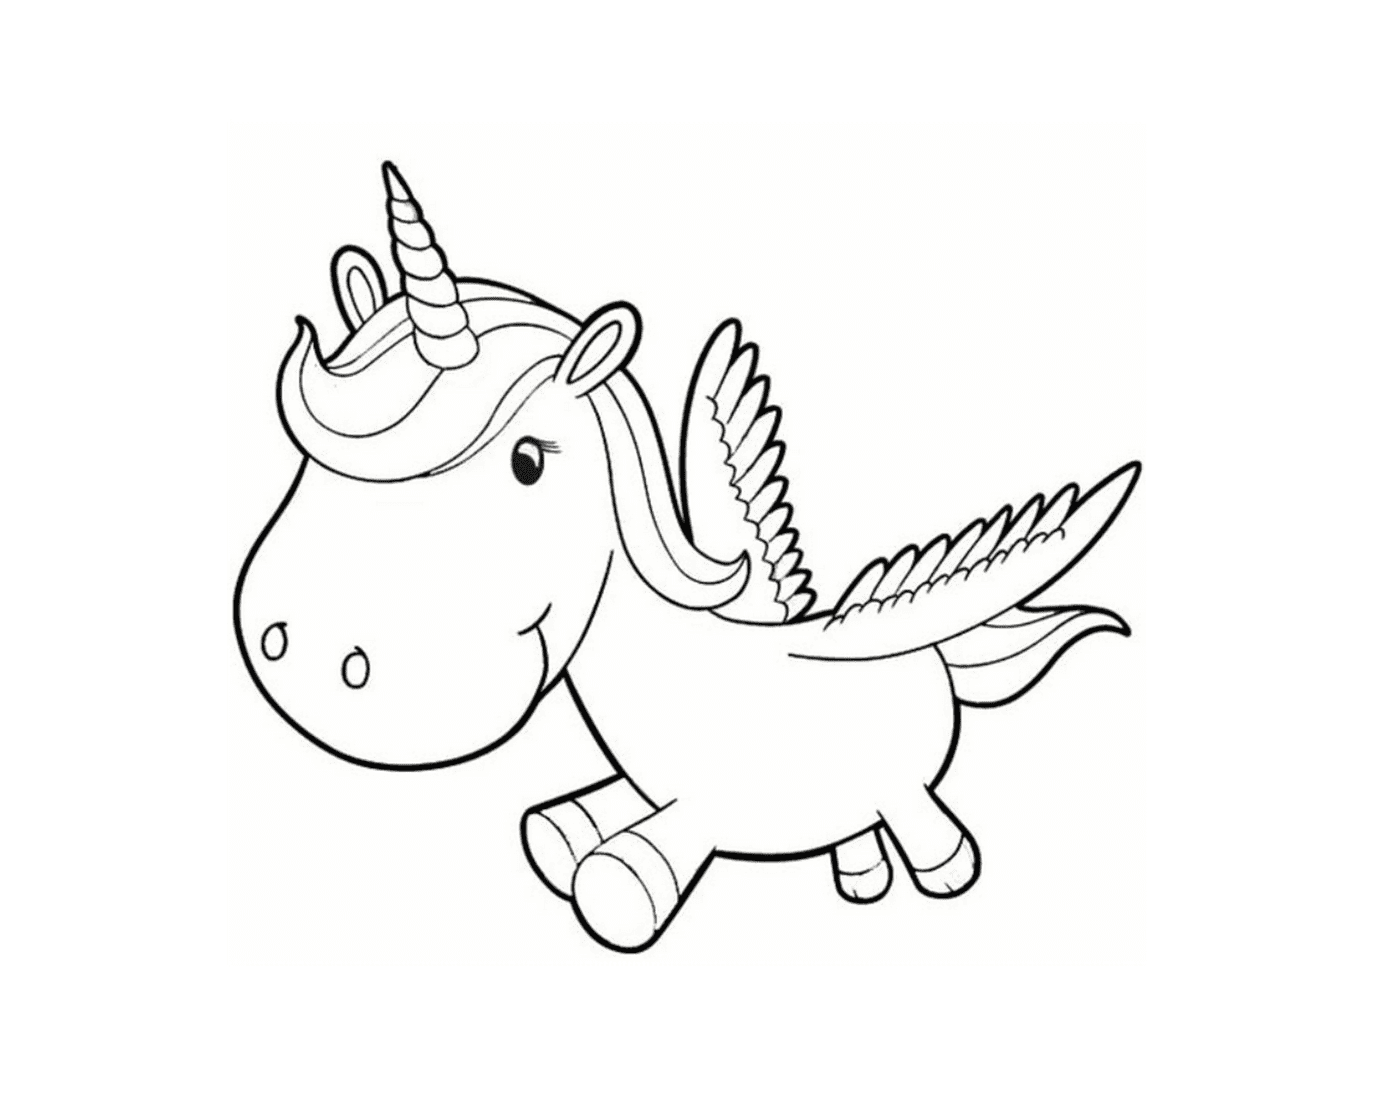  A unicorn with wings 